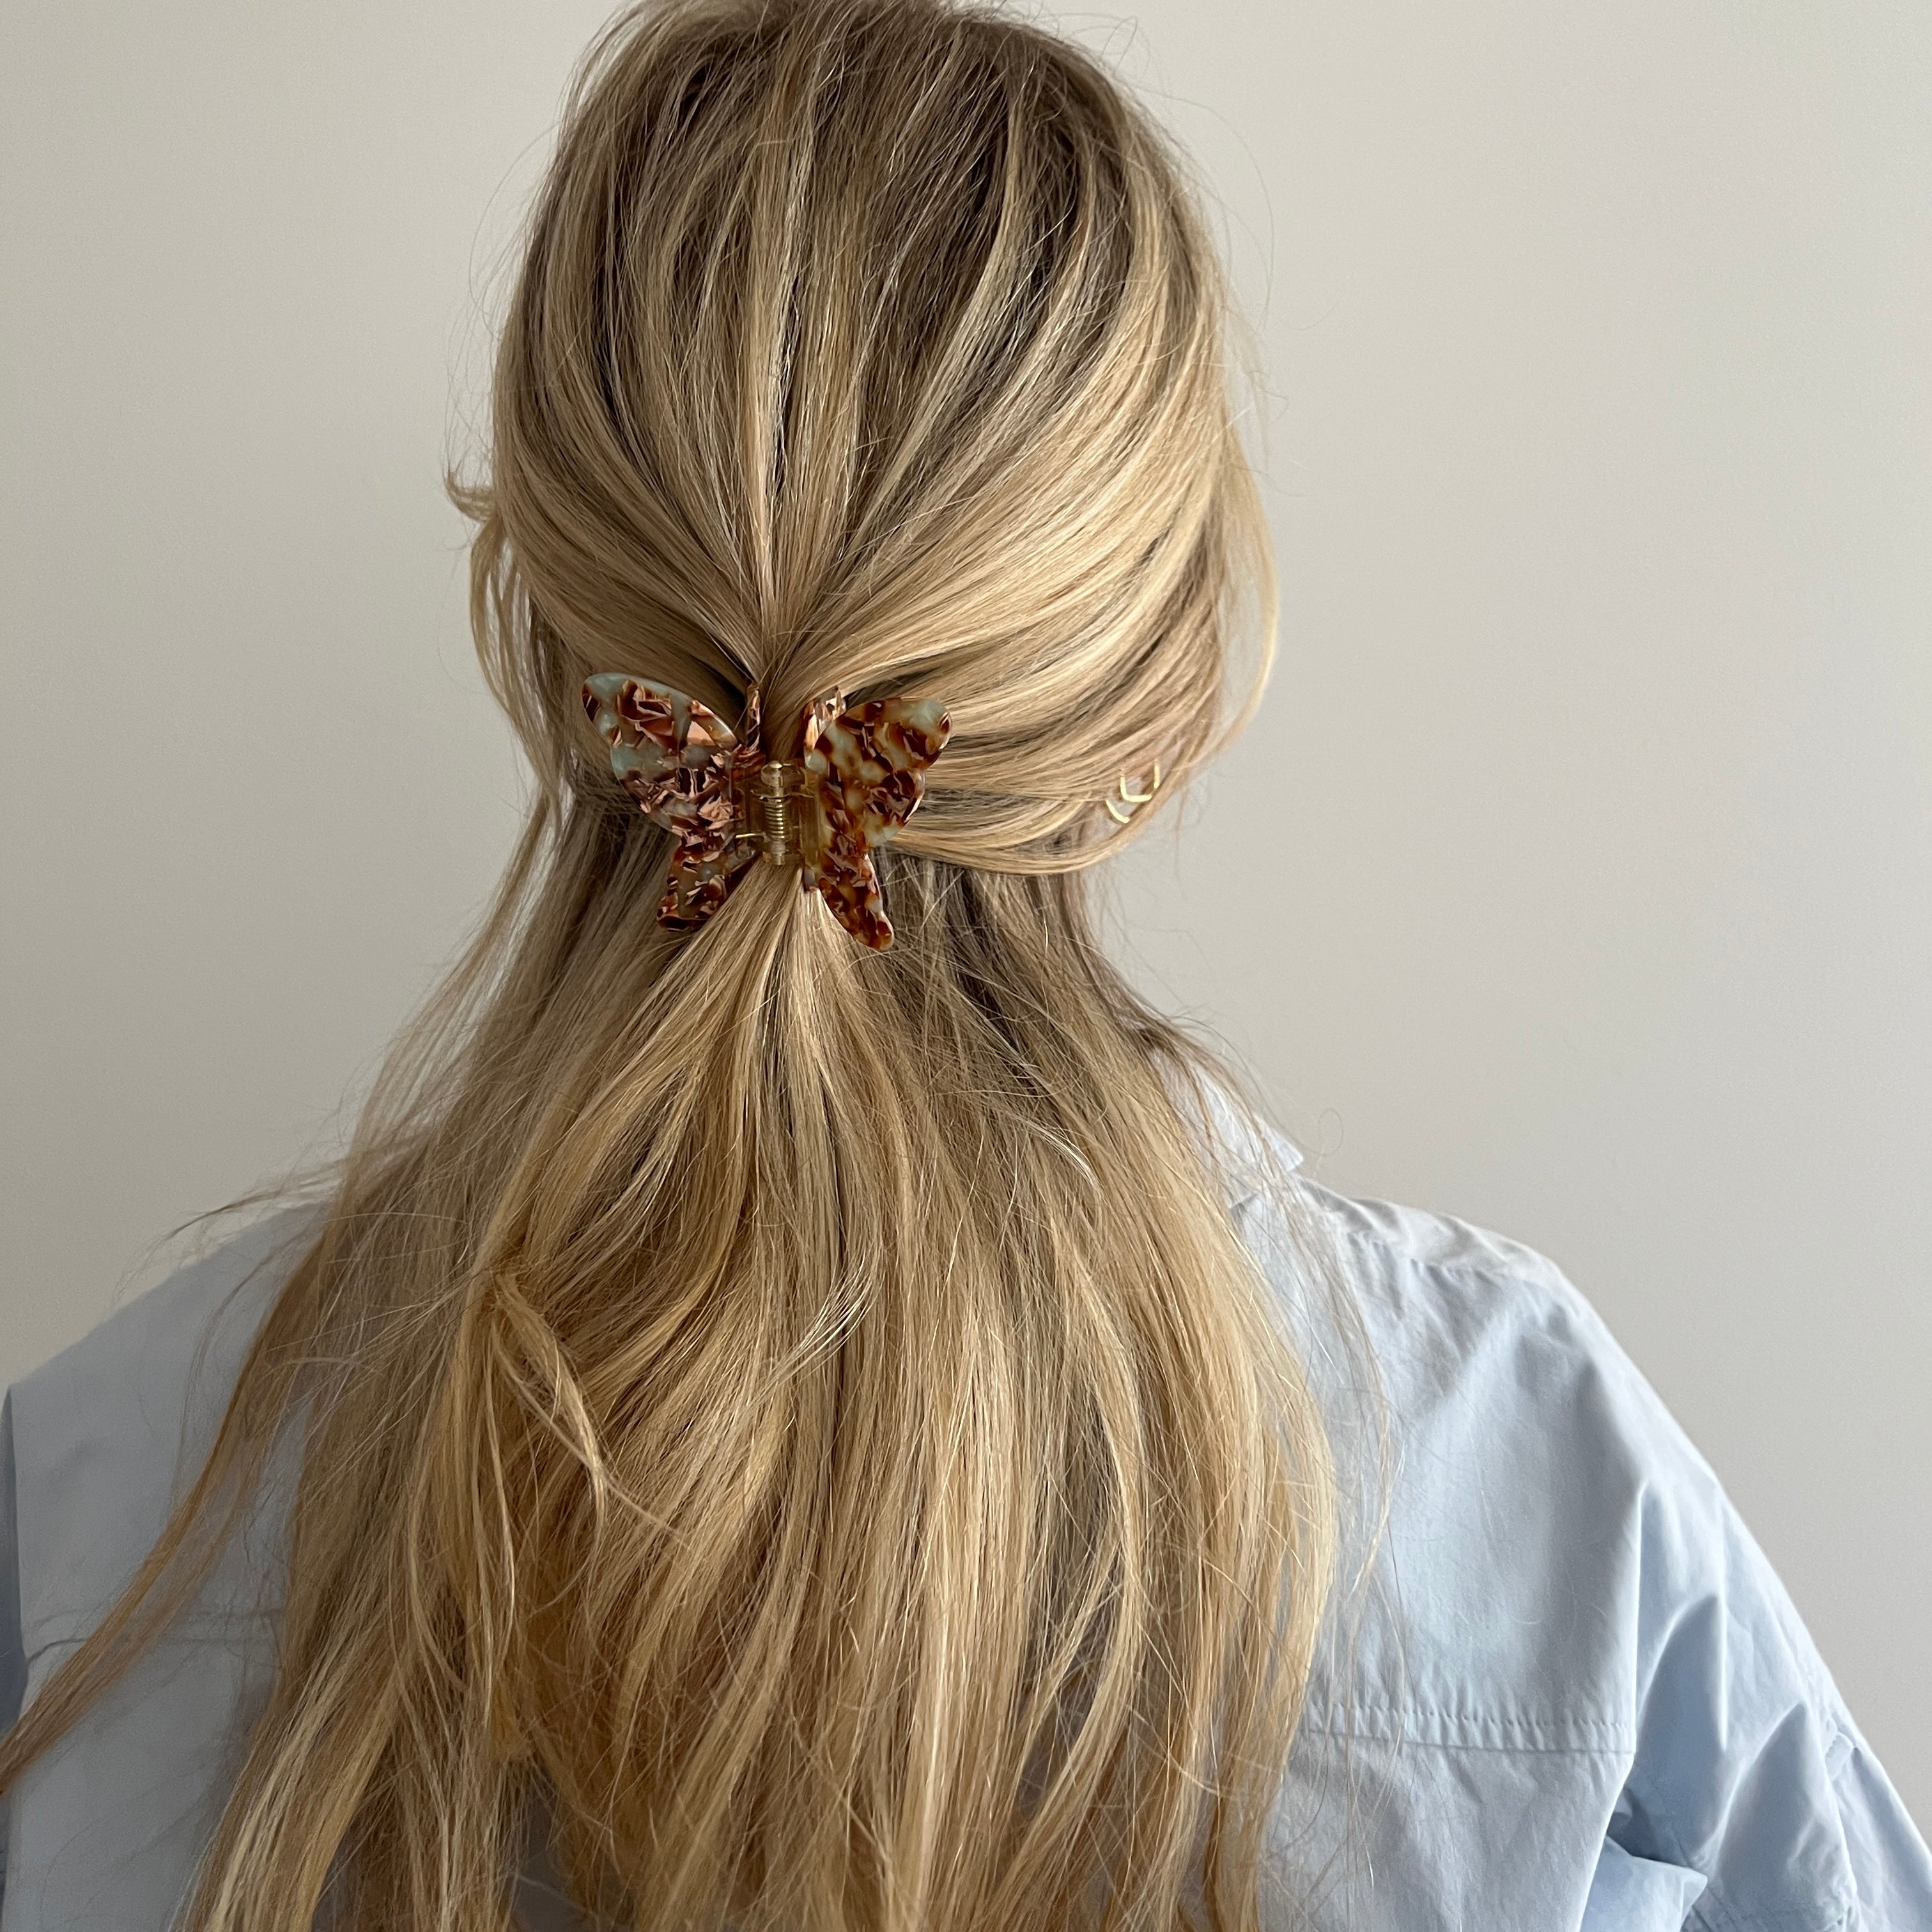 Butterfly Brown Hairclip